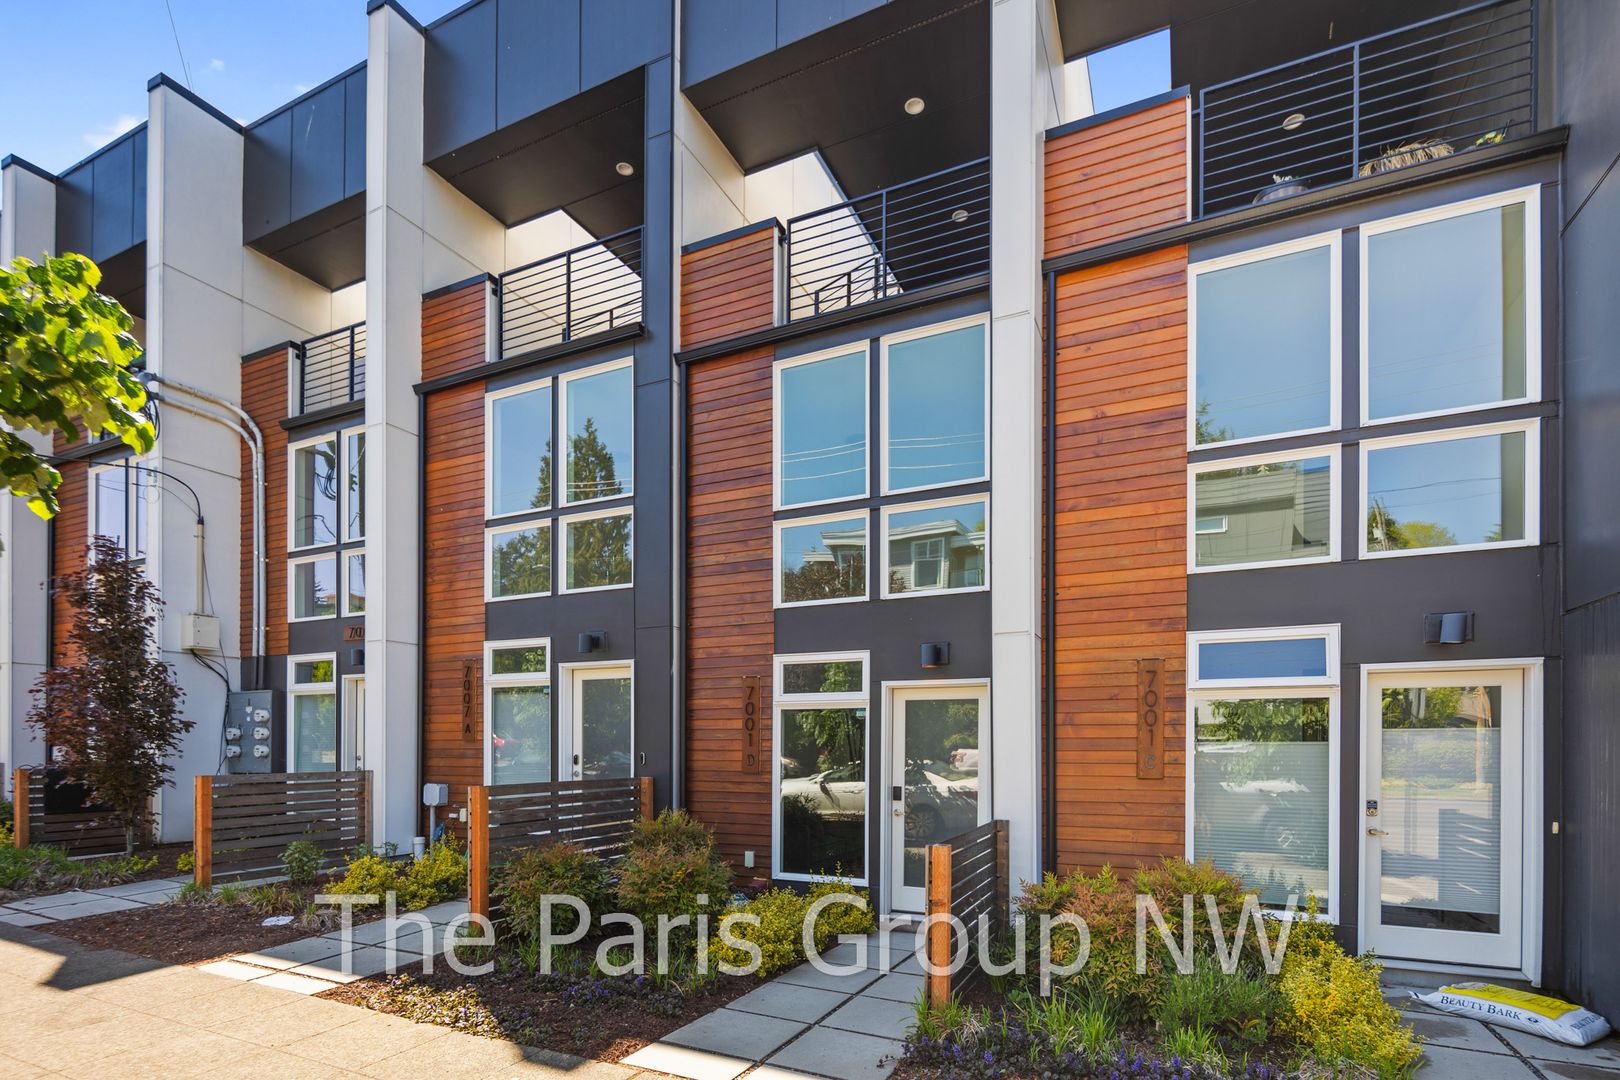 Fabulous W Seattle 2020 Townhome – HUGE Roof Deck + Covered Deck, Water Views, Great Location!